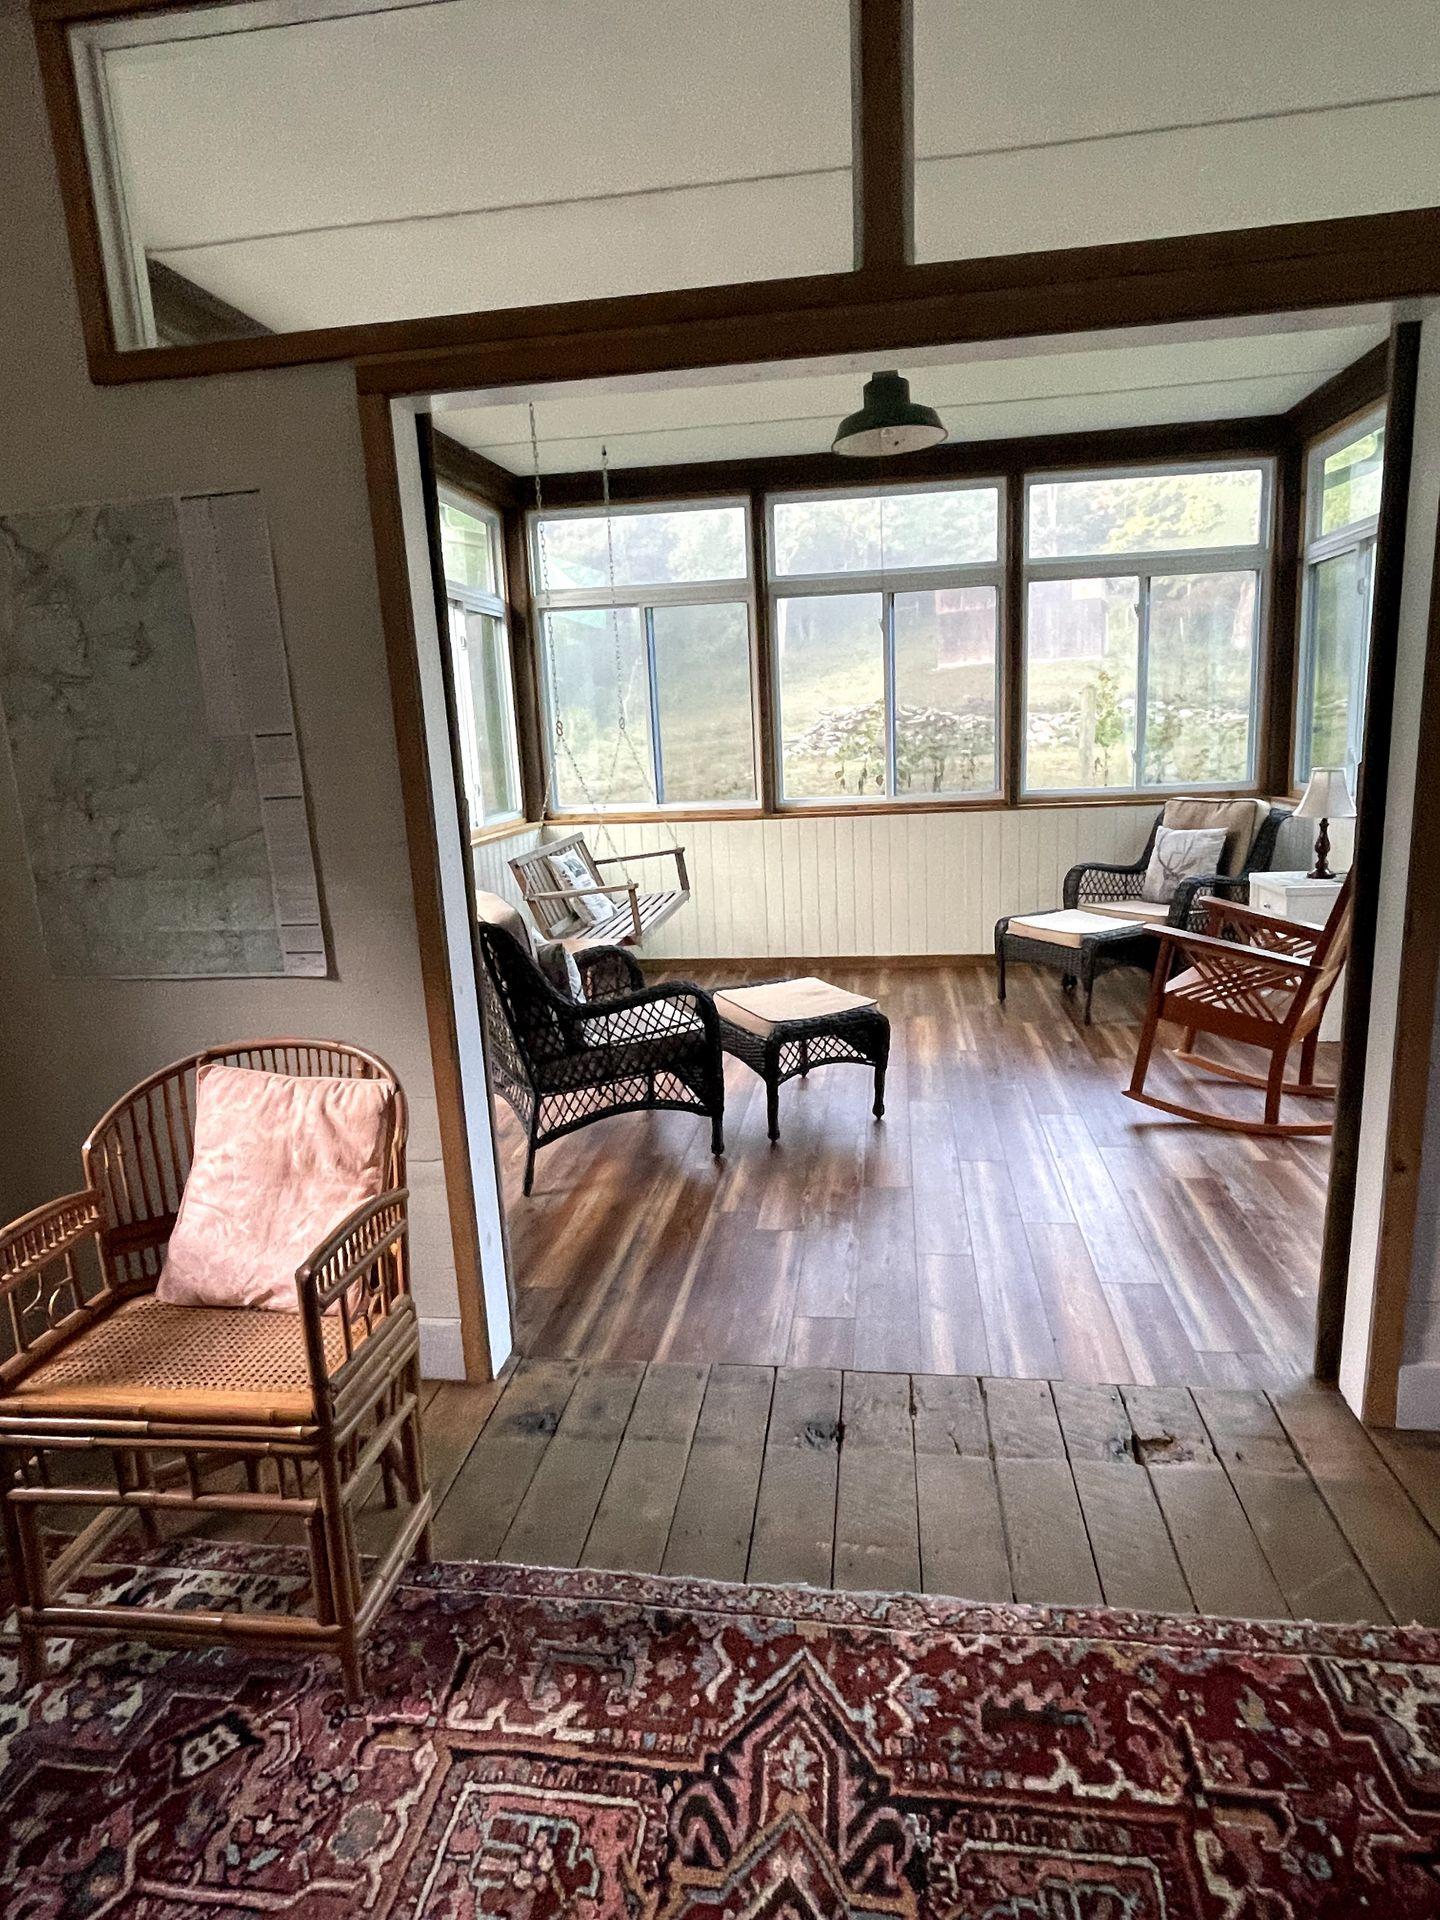 An interior photo of Five Springs Farm. There is a purple patterned rug, a floor of reclaimed wood and an ecletic mix of chairs.